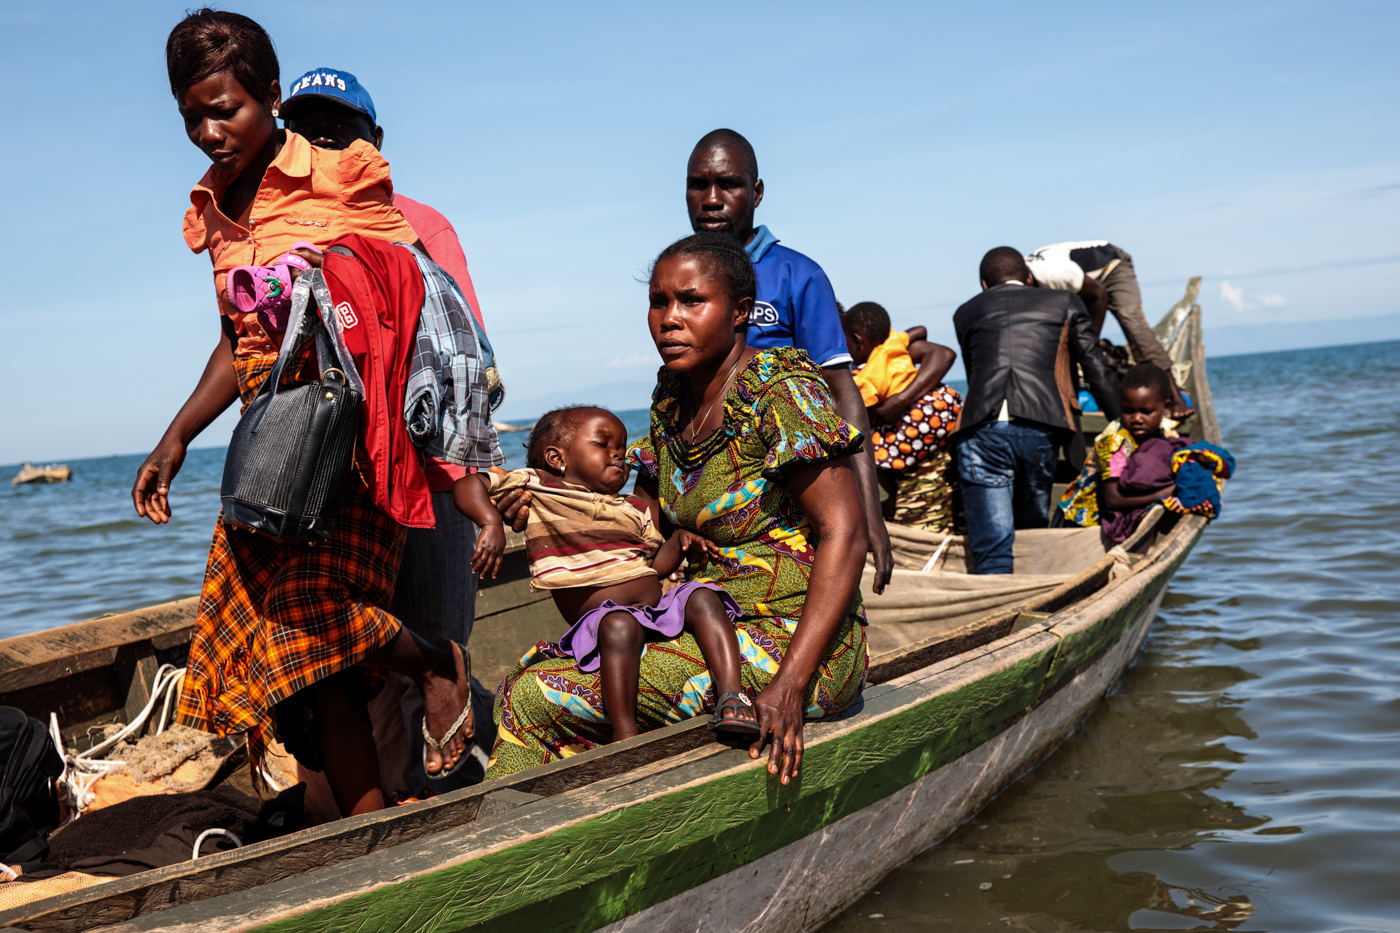  NSONGA, UGANDA: Refugees from Tchomia in the Democratic Republic of Congo arrive on boat at the Nsonga landing site on April 10, 2018. 